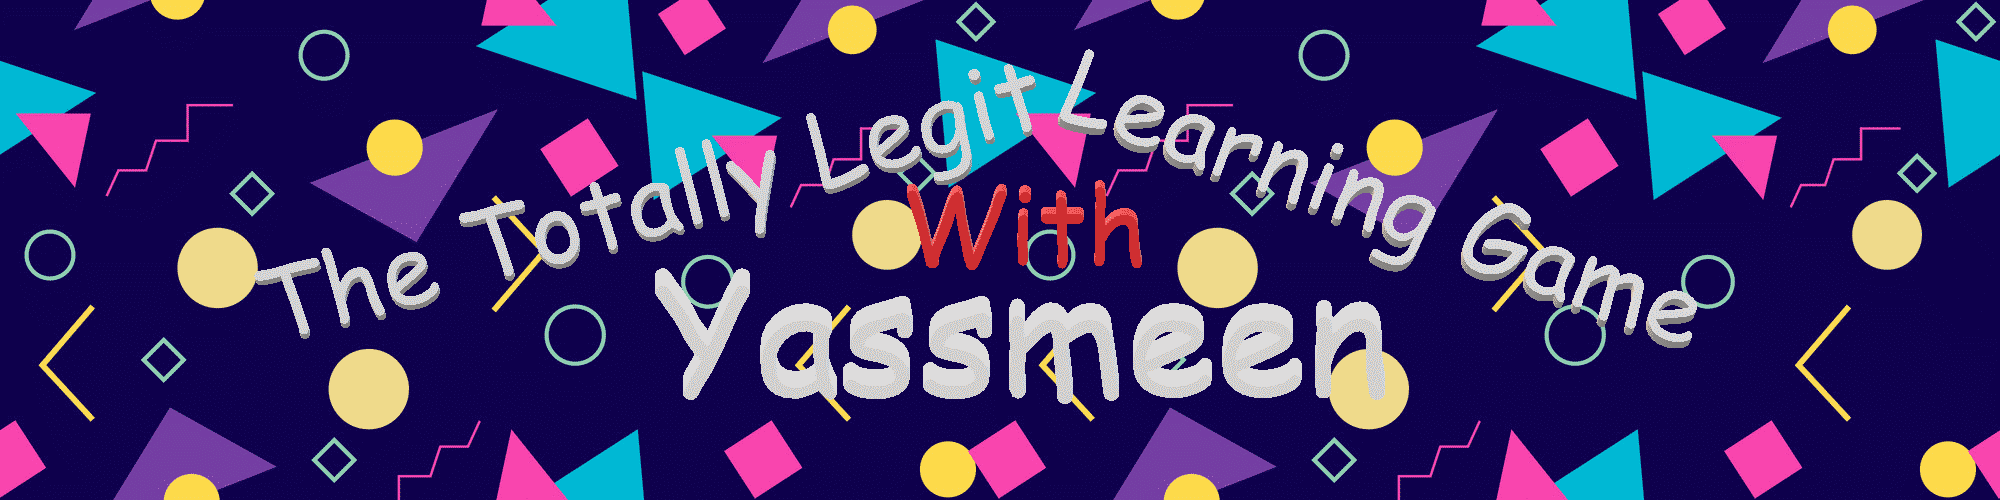 The Totally Legit Learning Game With Yassmeen